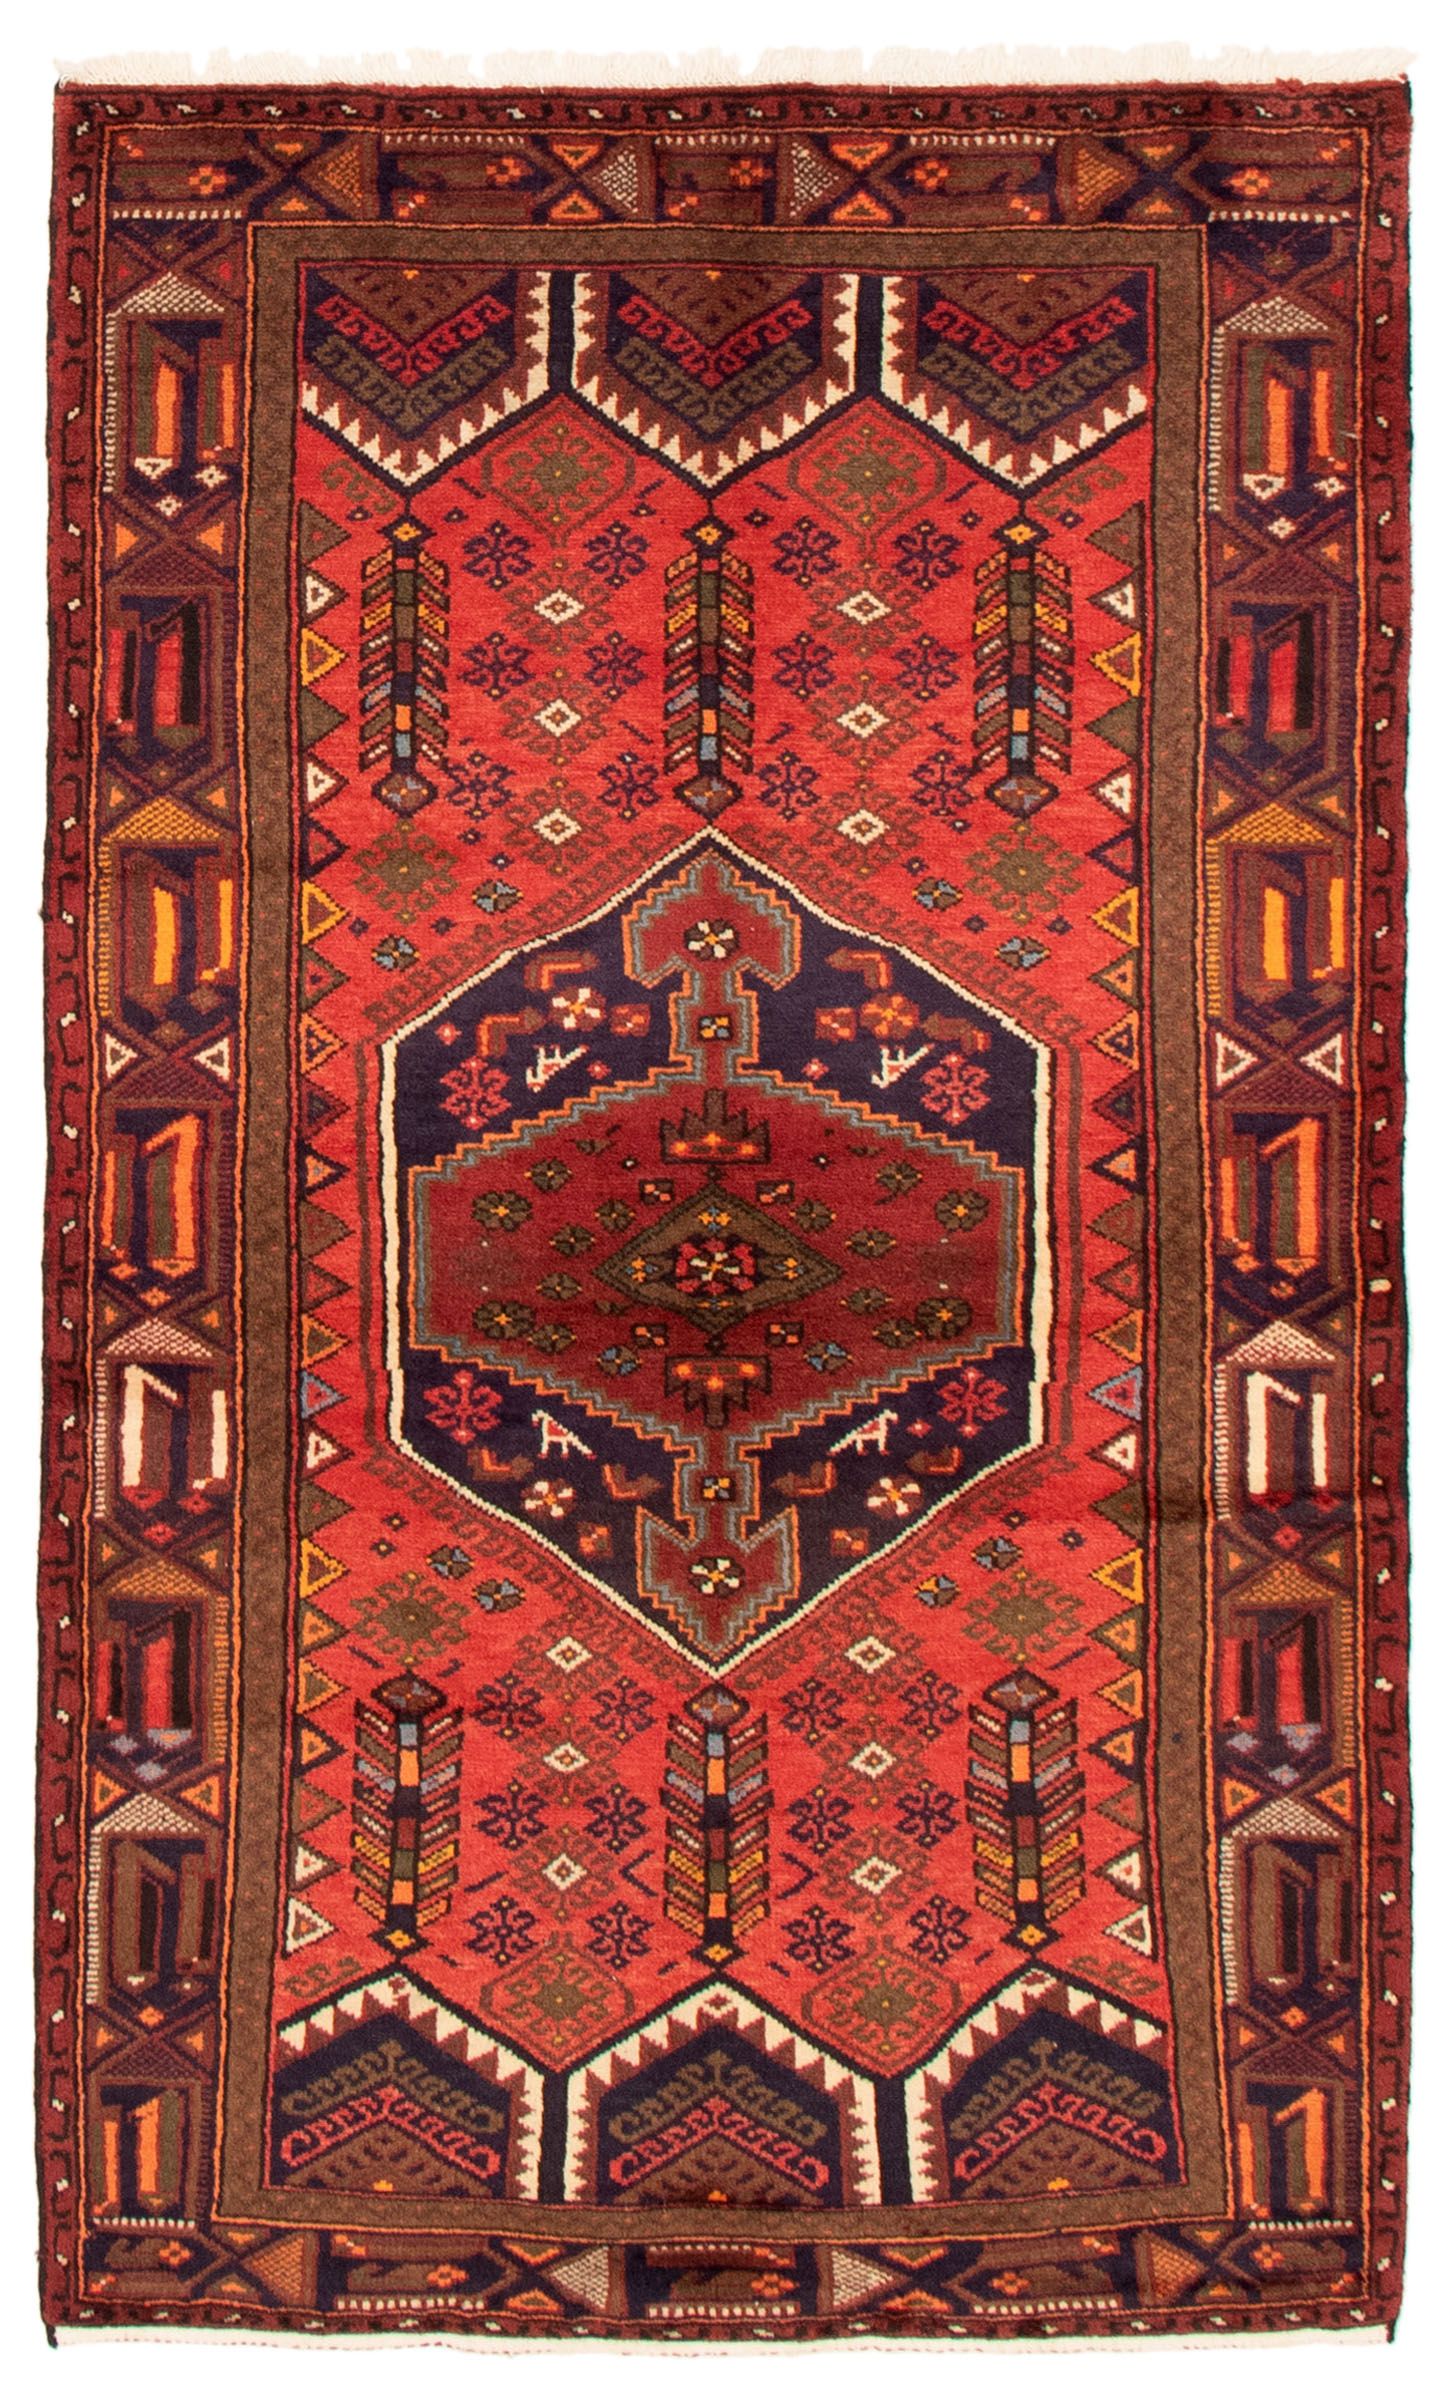 Bedroom Teimani Bordered Brown Rug 3'10 x 6'5 eCarpet Gallery Area Rug for Living Room Hand-Knotted Wool Rug 355730